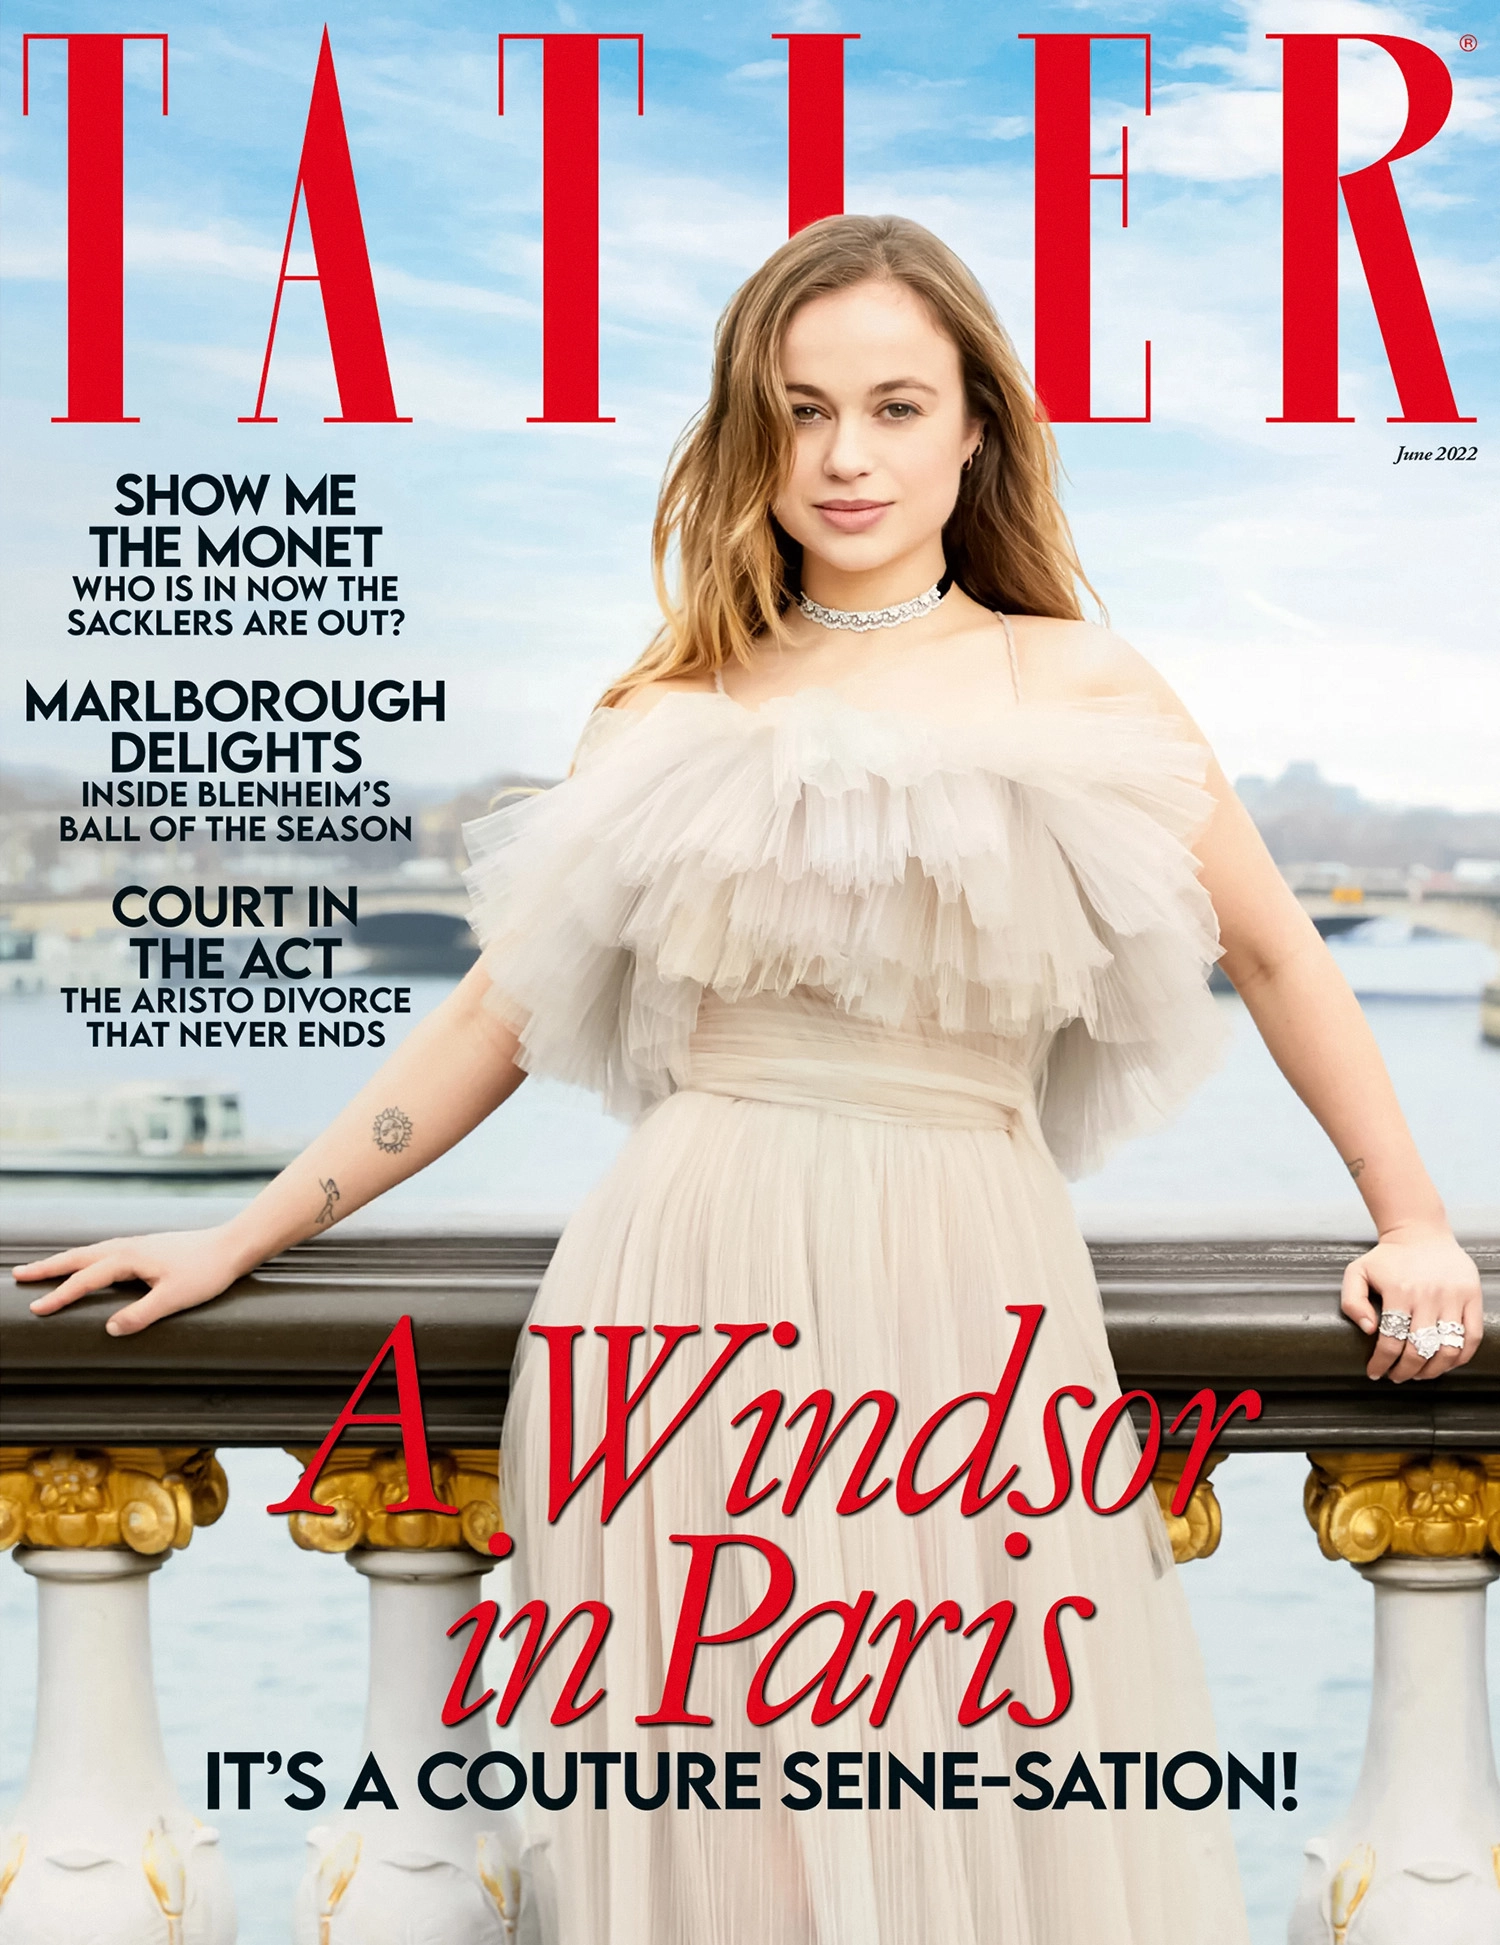 Lady Amelia Windsor in Christian Dior on Tatler UK June 2022 by Luc Braquet